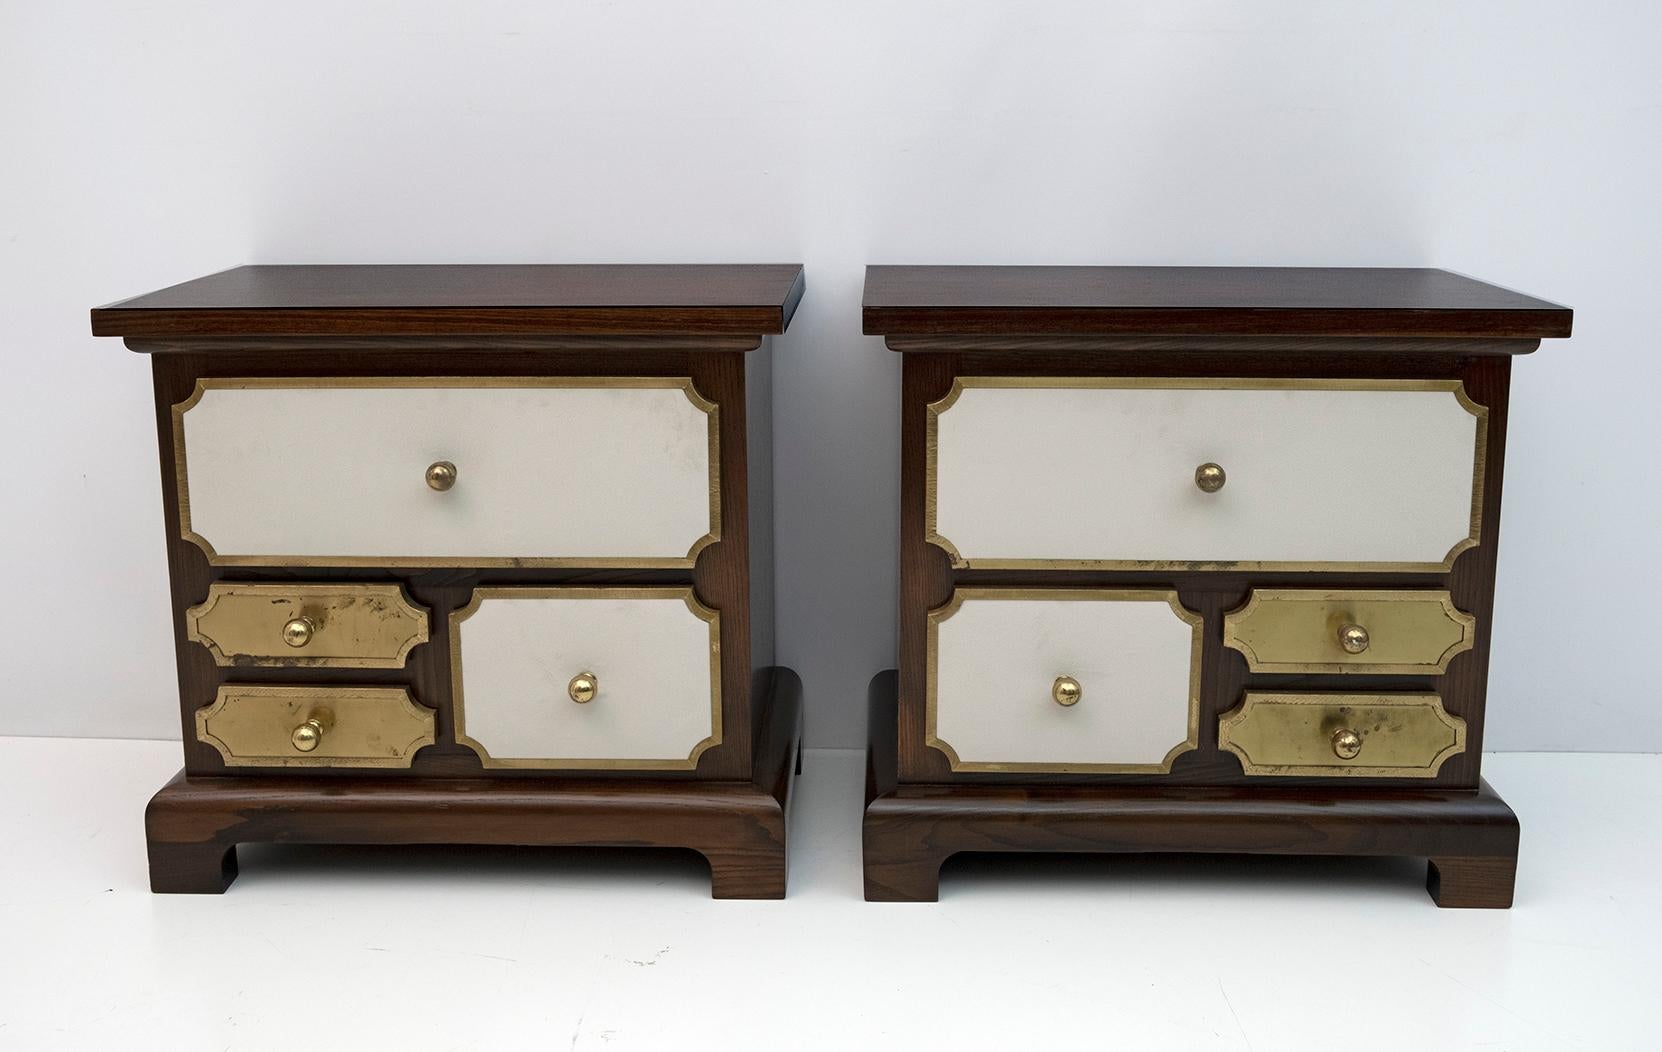 Pair of bedside tables designed by Luciano Frigerio in the 60s. In solid walnut, drawers with brass frames and ivory velvet upholstery, completely restored and polished with shellac. The brass is in patina, as shown in the photos.